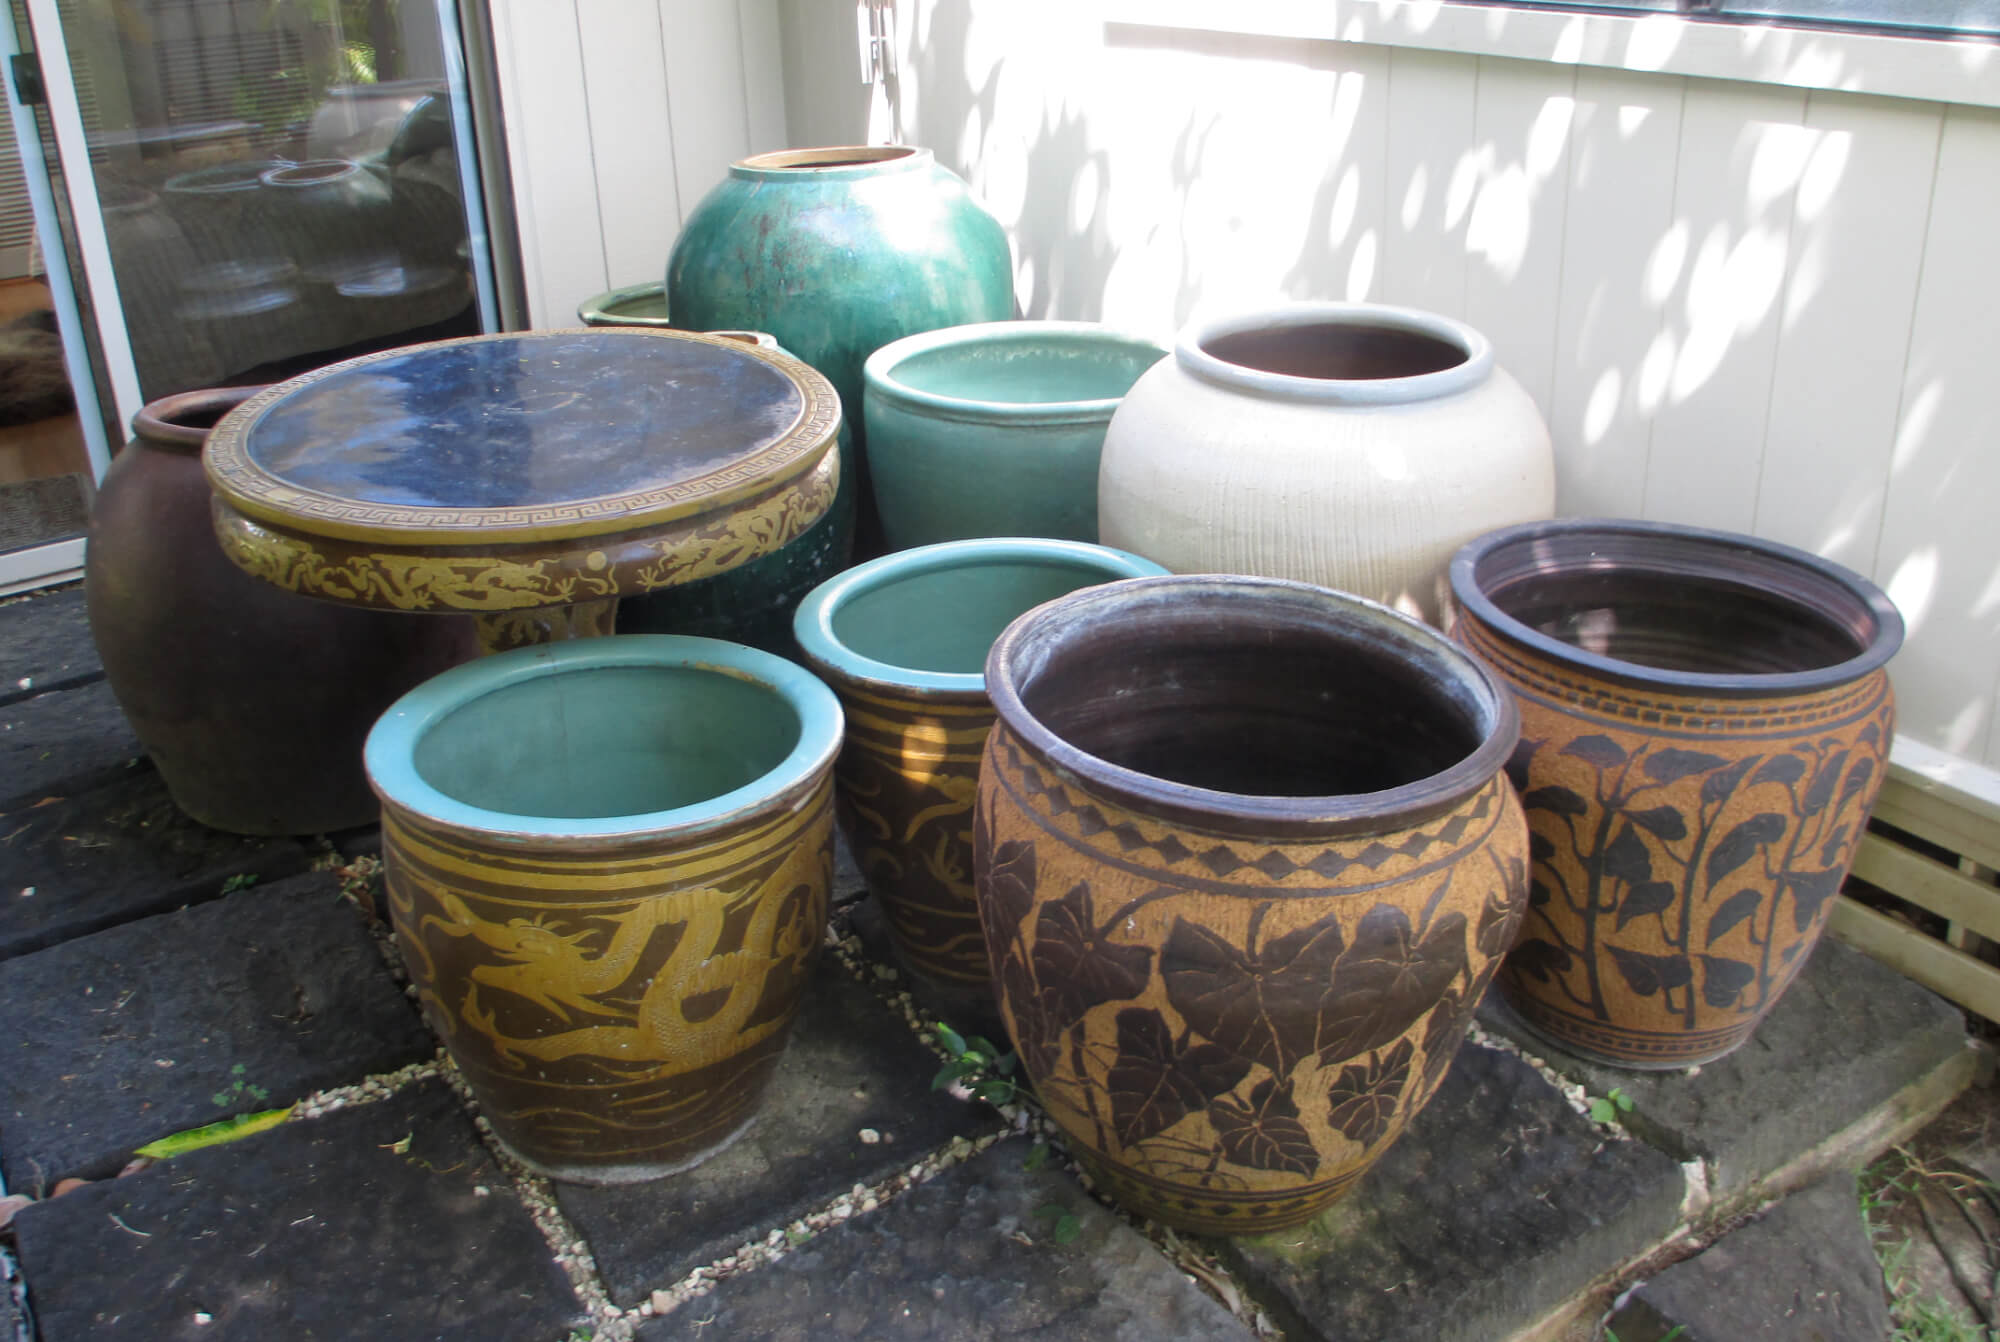 A fraction of Yuklin's amazing pot collection